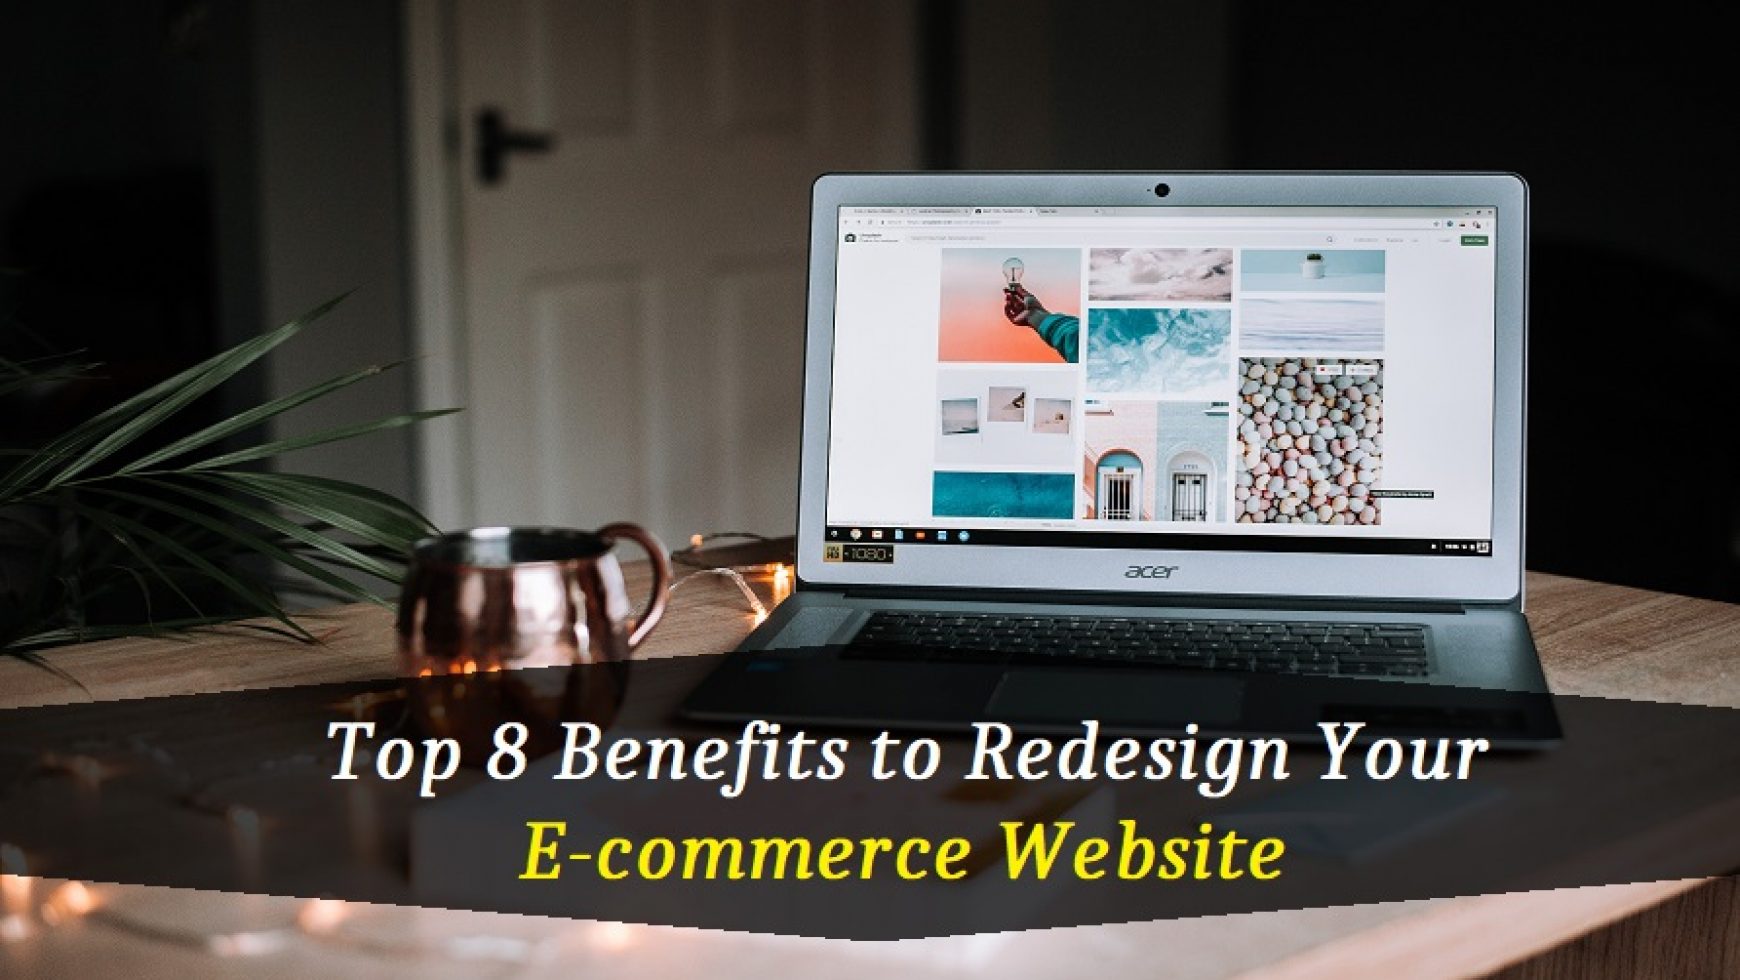 Top 8 Benefits to Redesign Your E-commerce Website